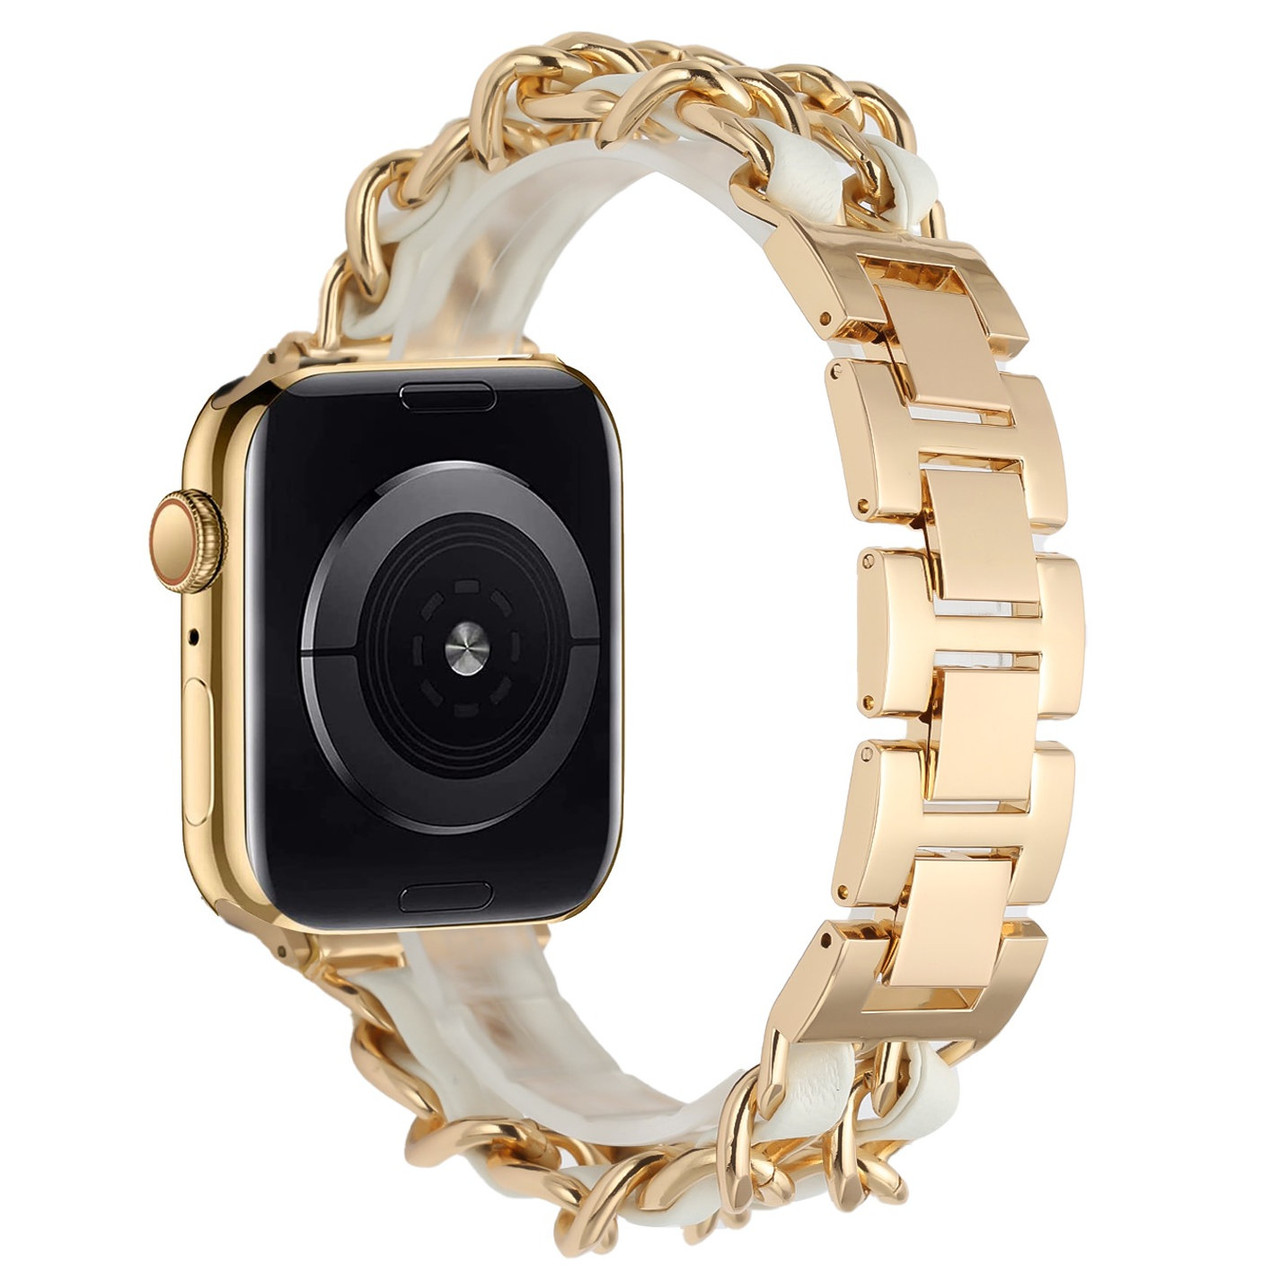 AWBEAUT iwatch38mm GDWH 73716.1662415488